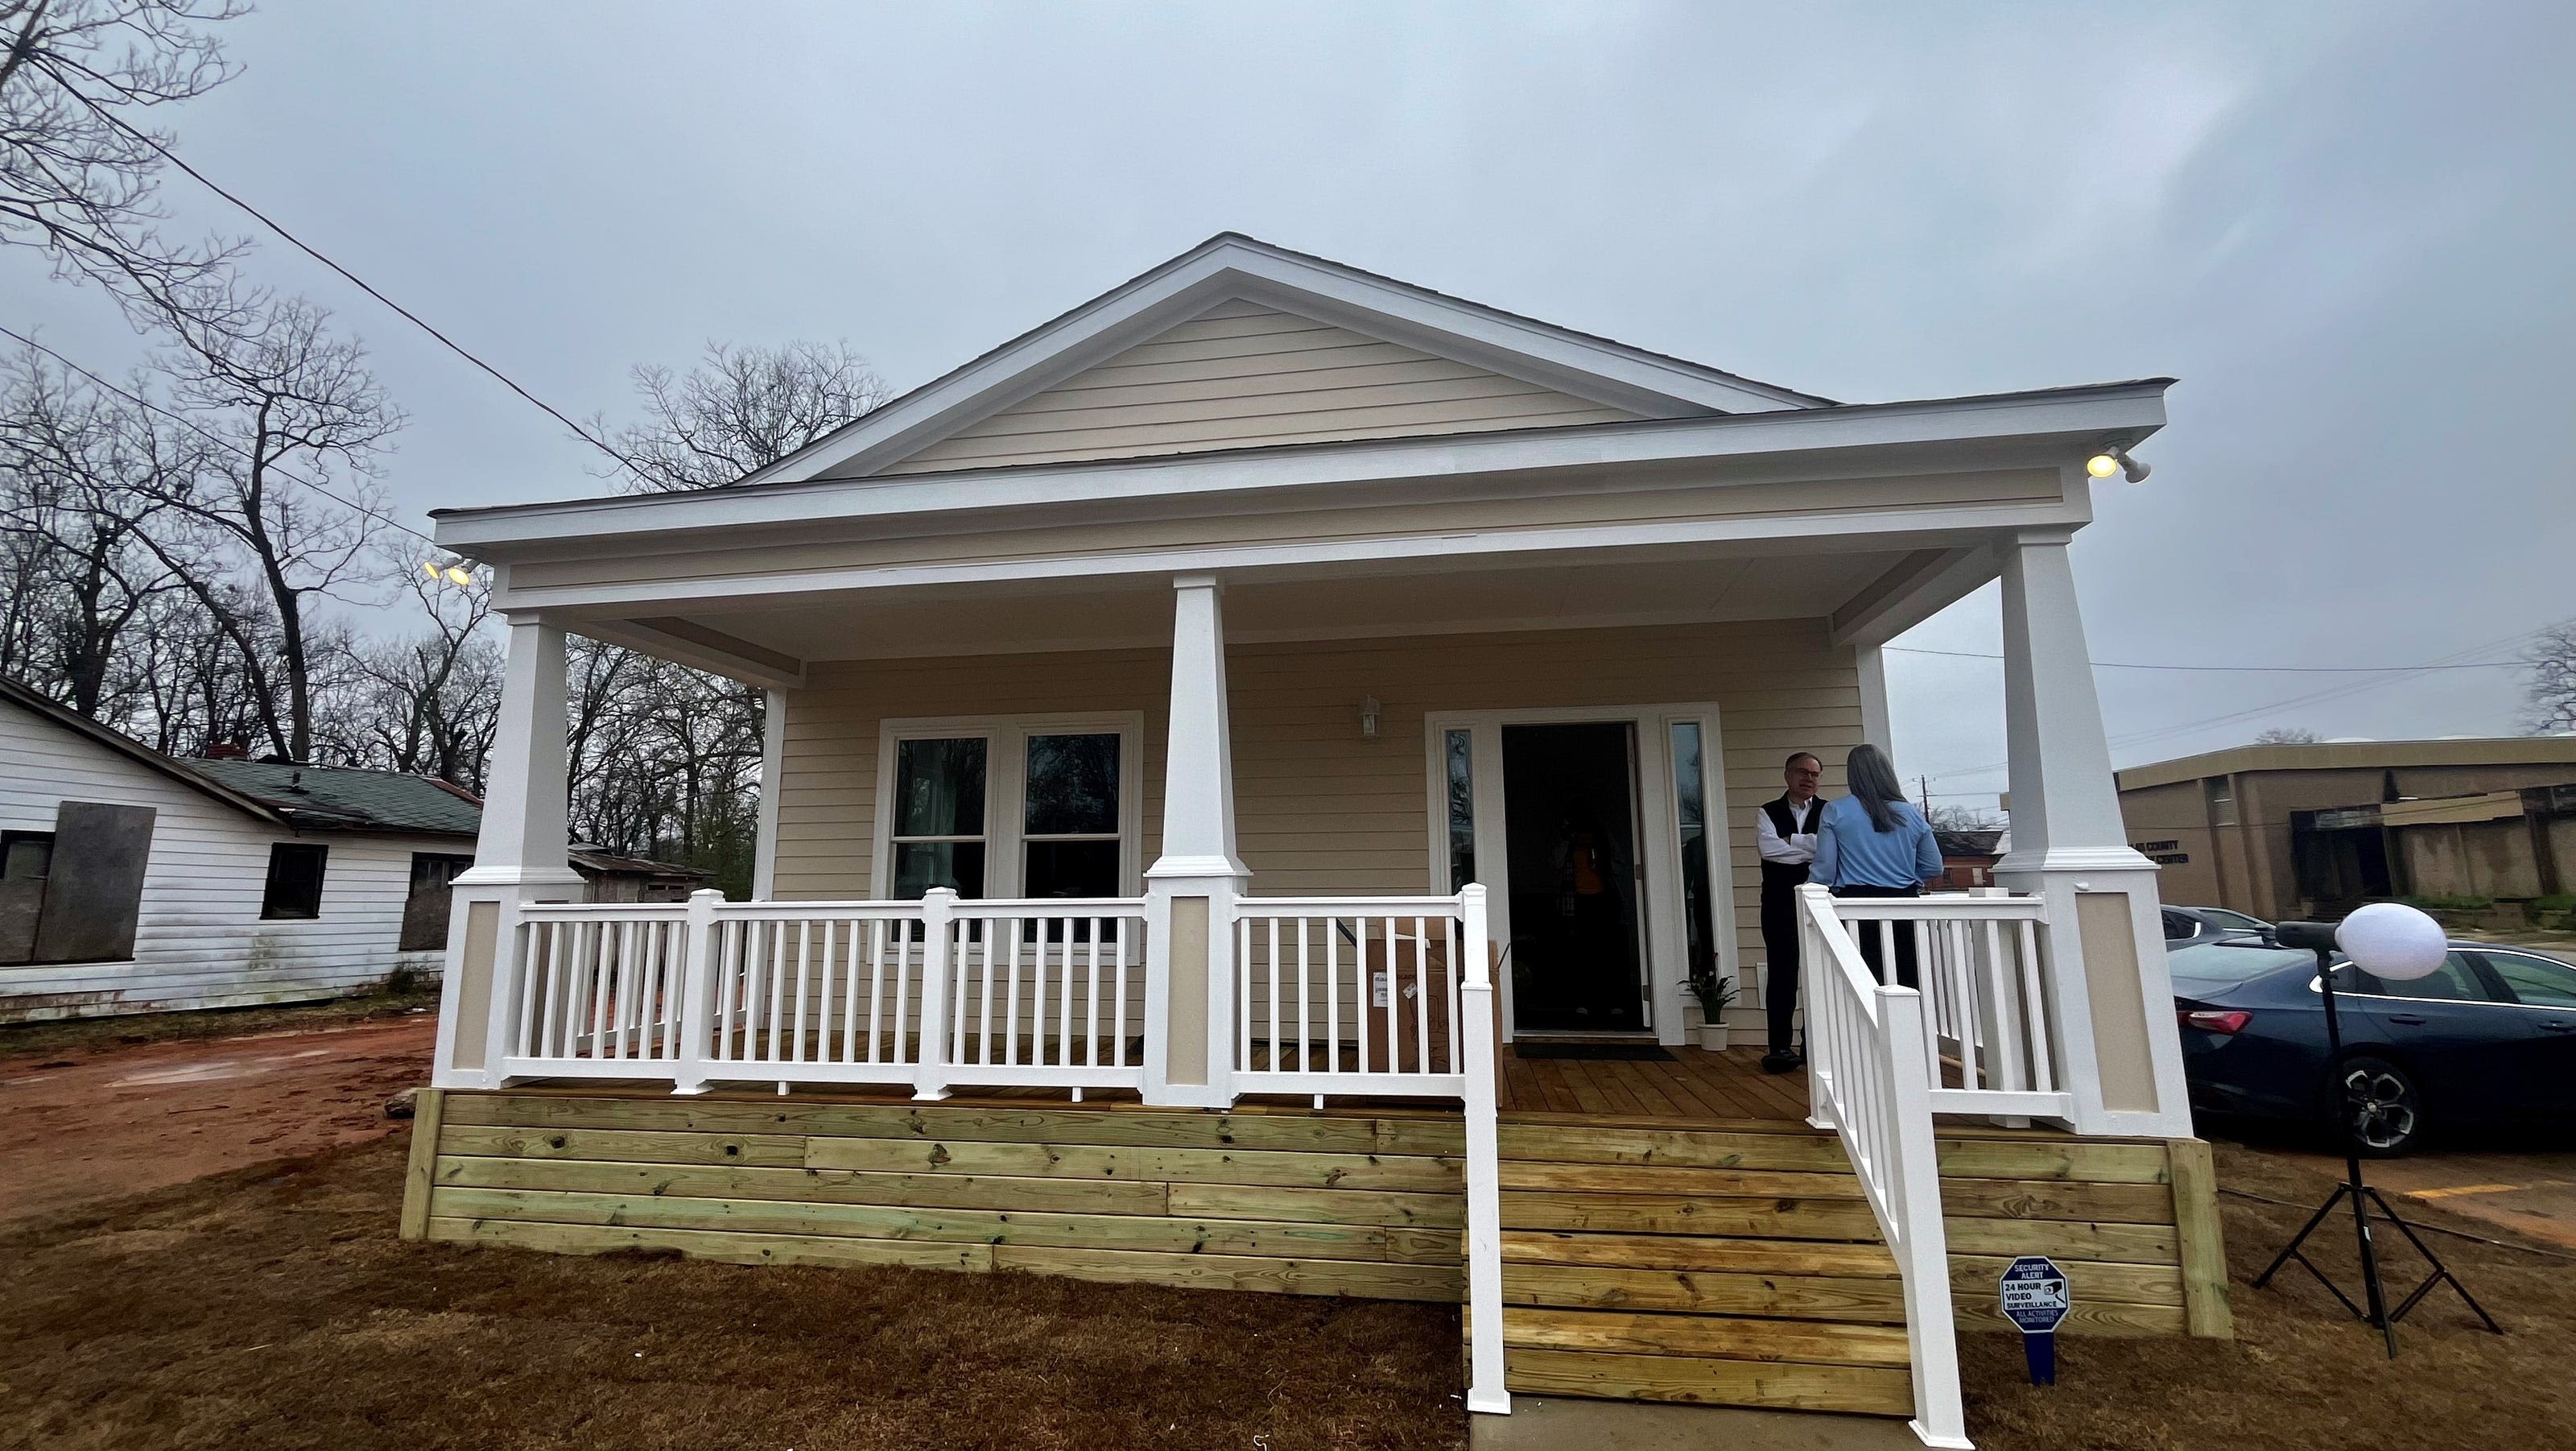 'Brand new start': Selma family wins home in housing authority's tornado recovery giveaway